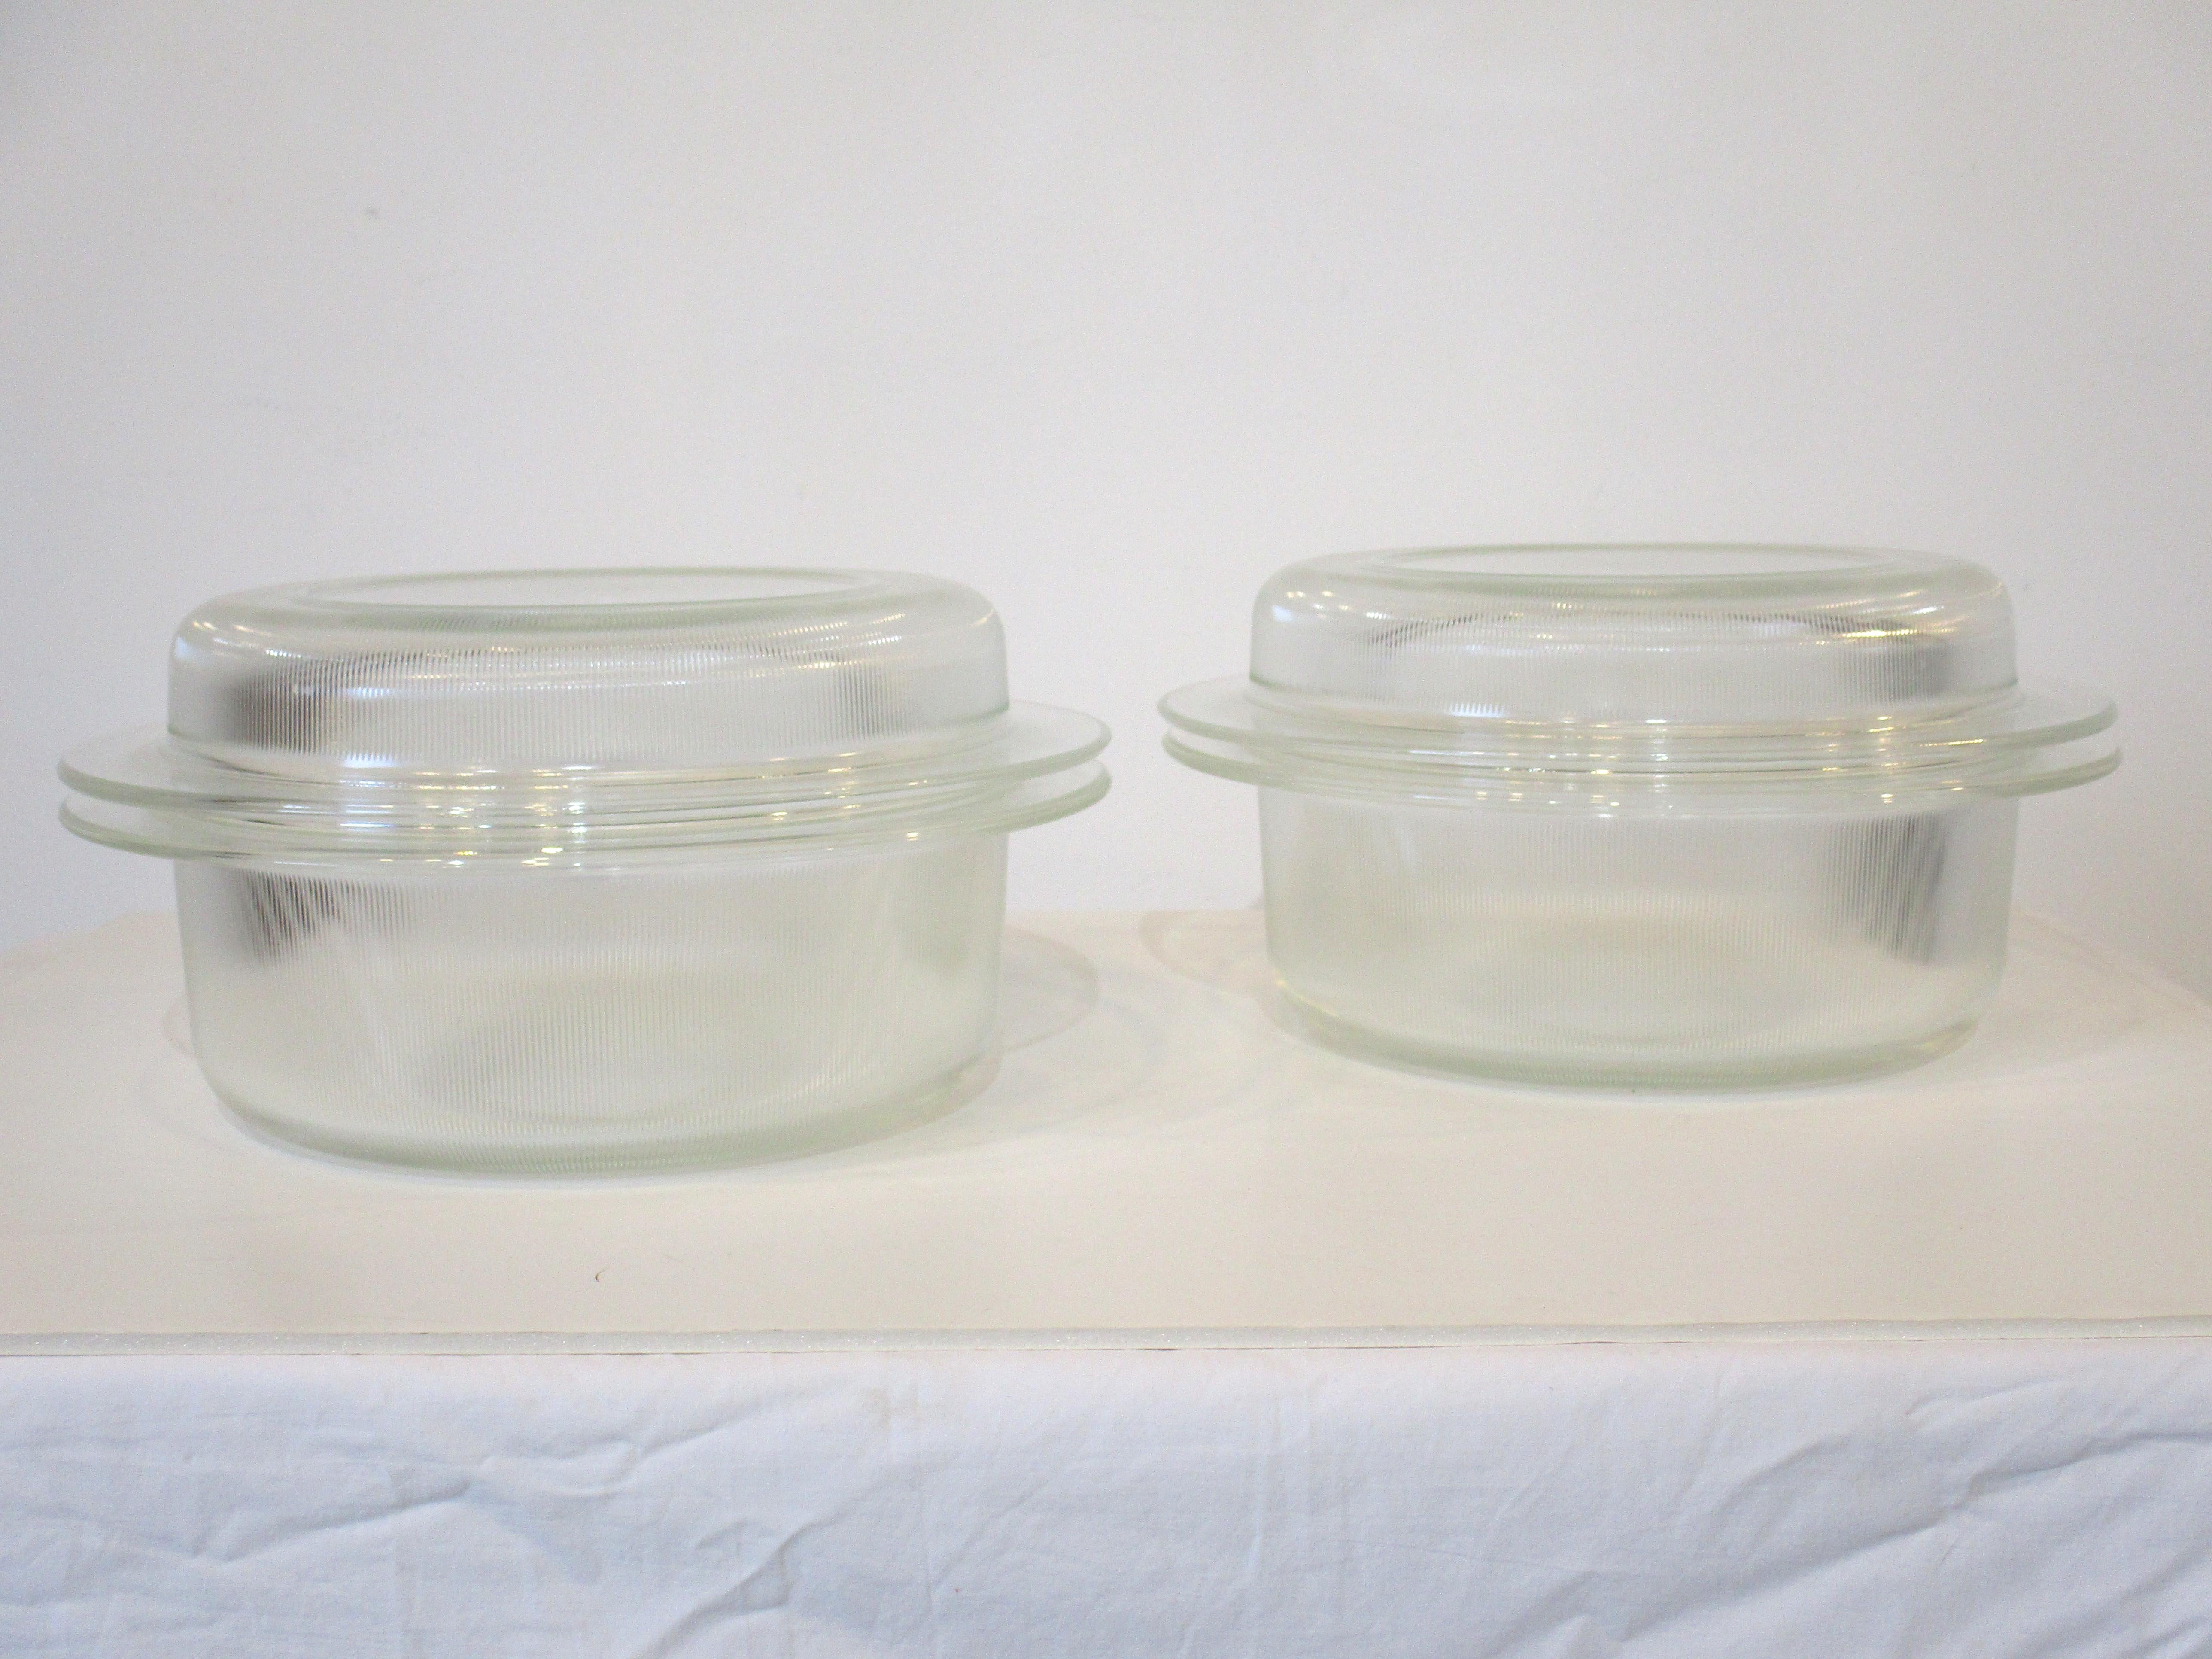 A set of two glass Heller bakeware pieces with lids designed by L & M Vignelli that can be used in the oven, microwave or as severing pieces. The lids can be used as pie pans so the four pieces are very versatile they hold 3 quarts and are the